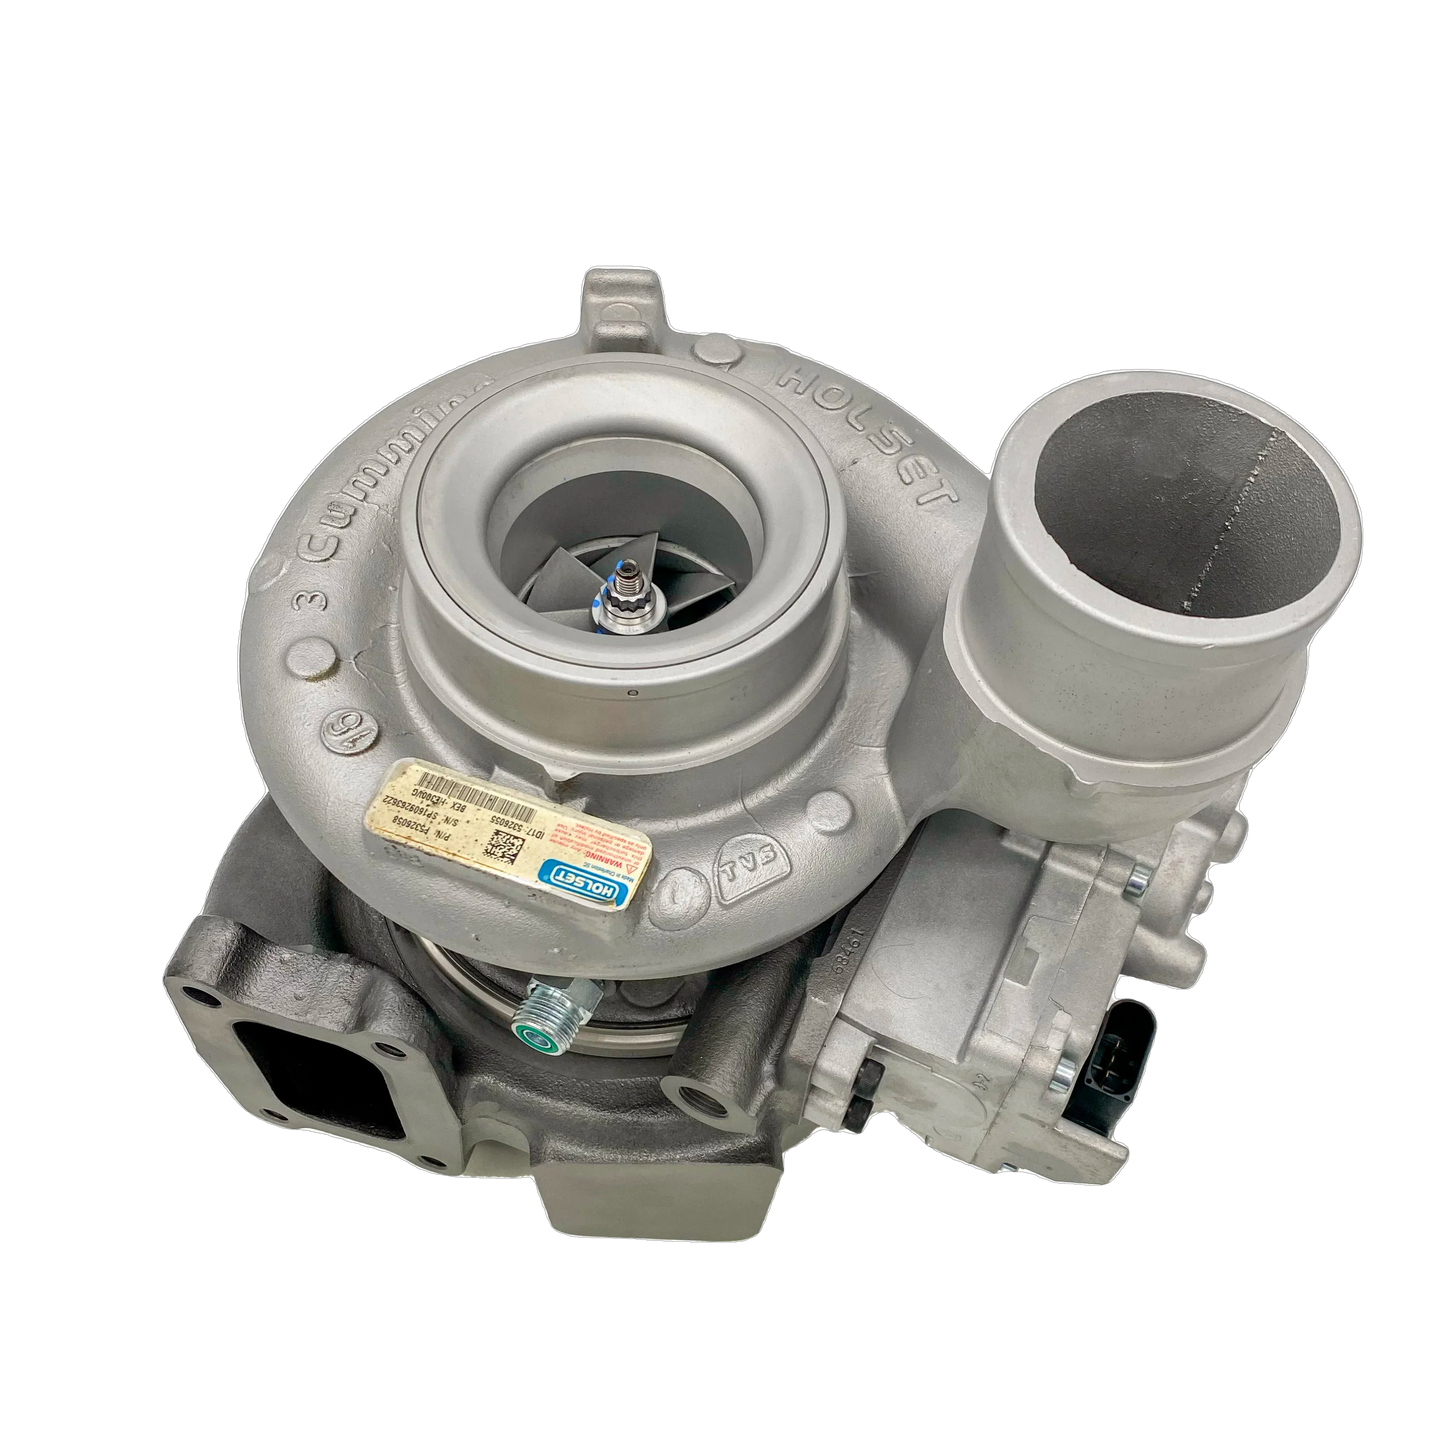 HE351VE Turbo with Holset VGT (Remanufactured) - 6.7 Cummins (2007.5 - 2012)